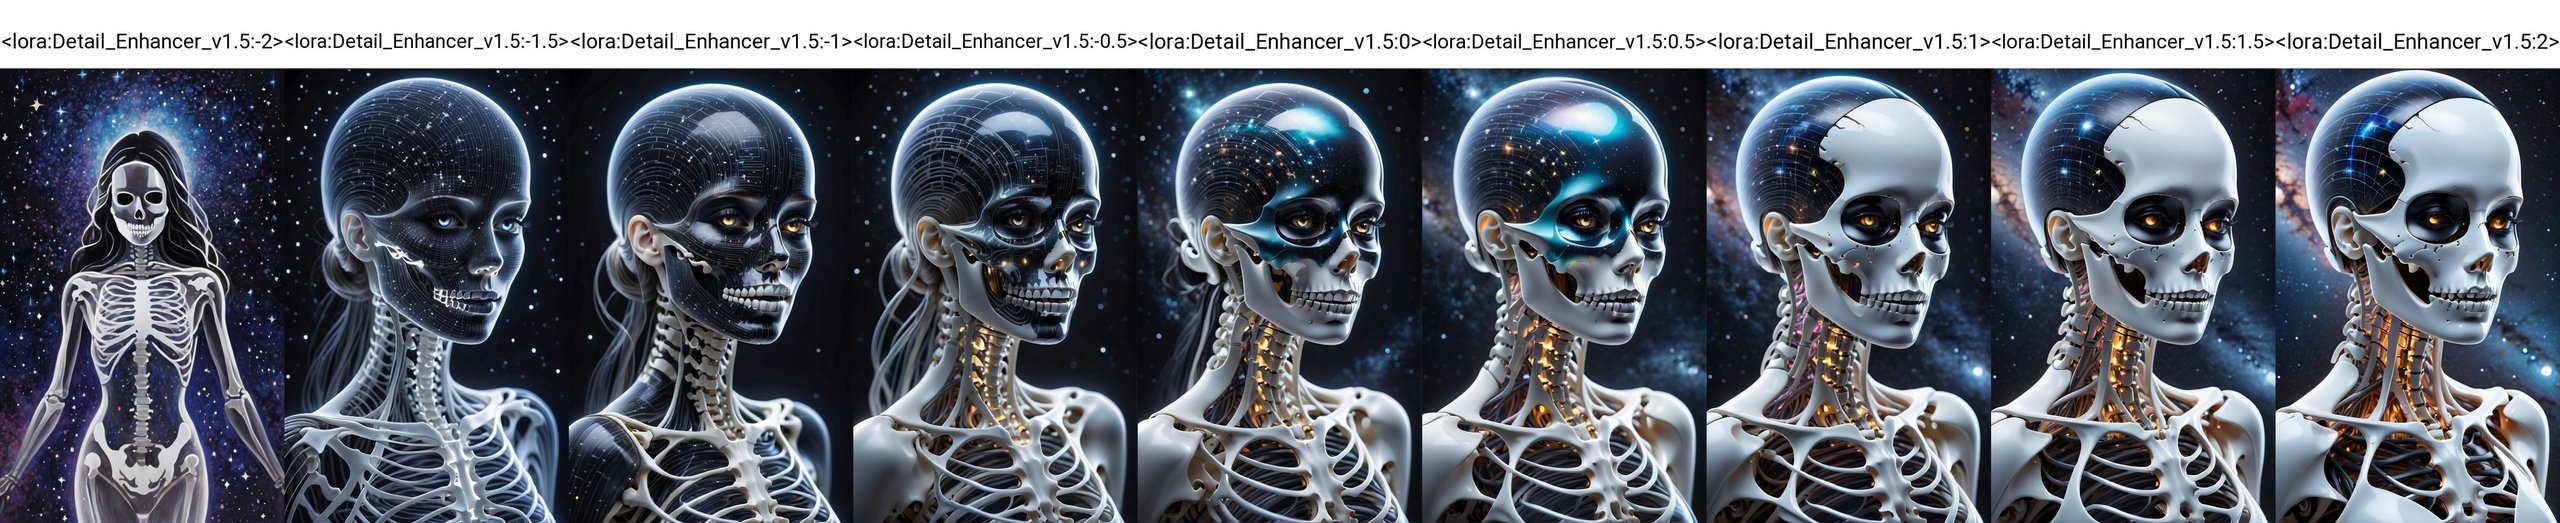 (best quality,8K,highres,masterpiece), ultra-detailed, featuring a woman with her face obscured by a grey square, set against a cosmic, star-filled background. The woman appears to be wearing or integrated with an intricate skeletal structure that is white and somewhat luminescent. The cosmic backdrop bathes the scene in a mesmerizing array of stars and galaxies, creating a sense of vastness and wonder. The obscured face adds an air of mystery and intrigue, inviting viewers to ponder the hidden depths of the character's identity. Meanwhile, the intricate skeletal structure adds a touch of ethereal beauty and symbolism, hinting at themes of mortality, transformation, and the interconnectedness of all things. This artwork is a captivating exploration of the human form amidst the cosmic expanse, blending elements of mystery, beauty, and cosmic wonder<lora:Detail_Enhancer_v1.5:-2>